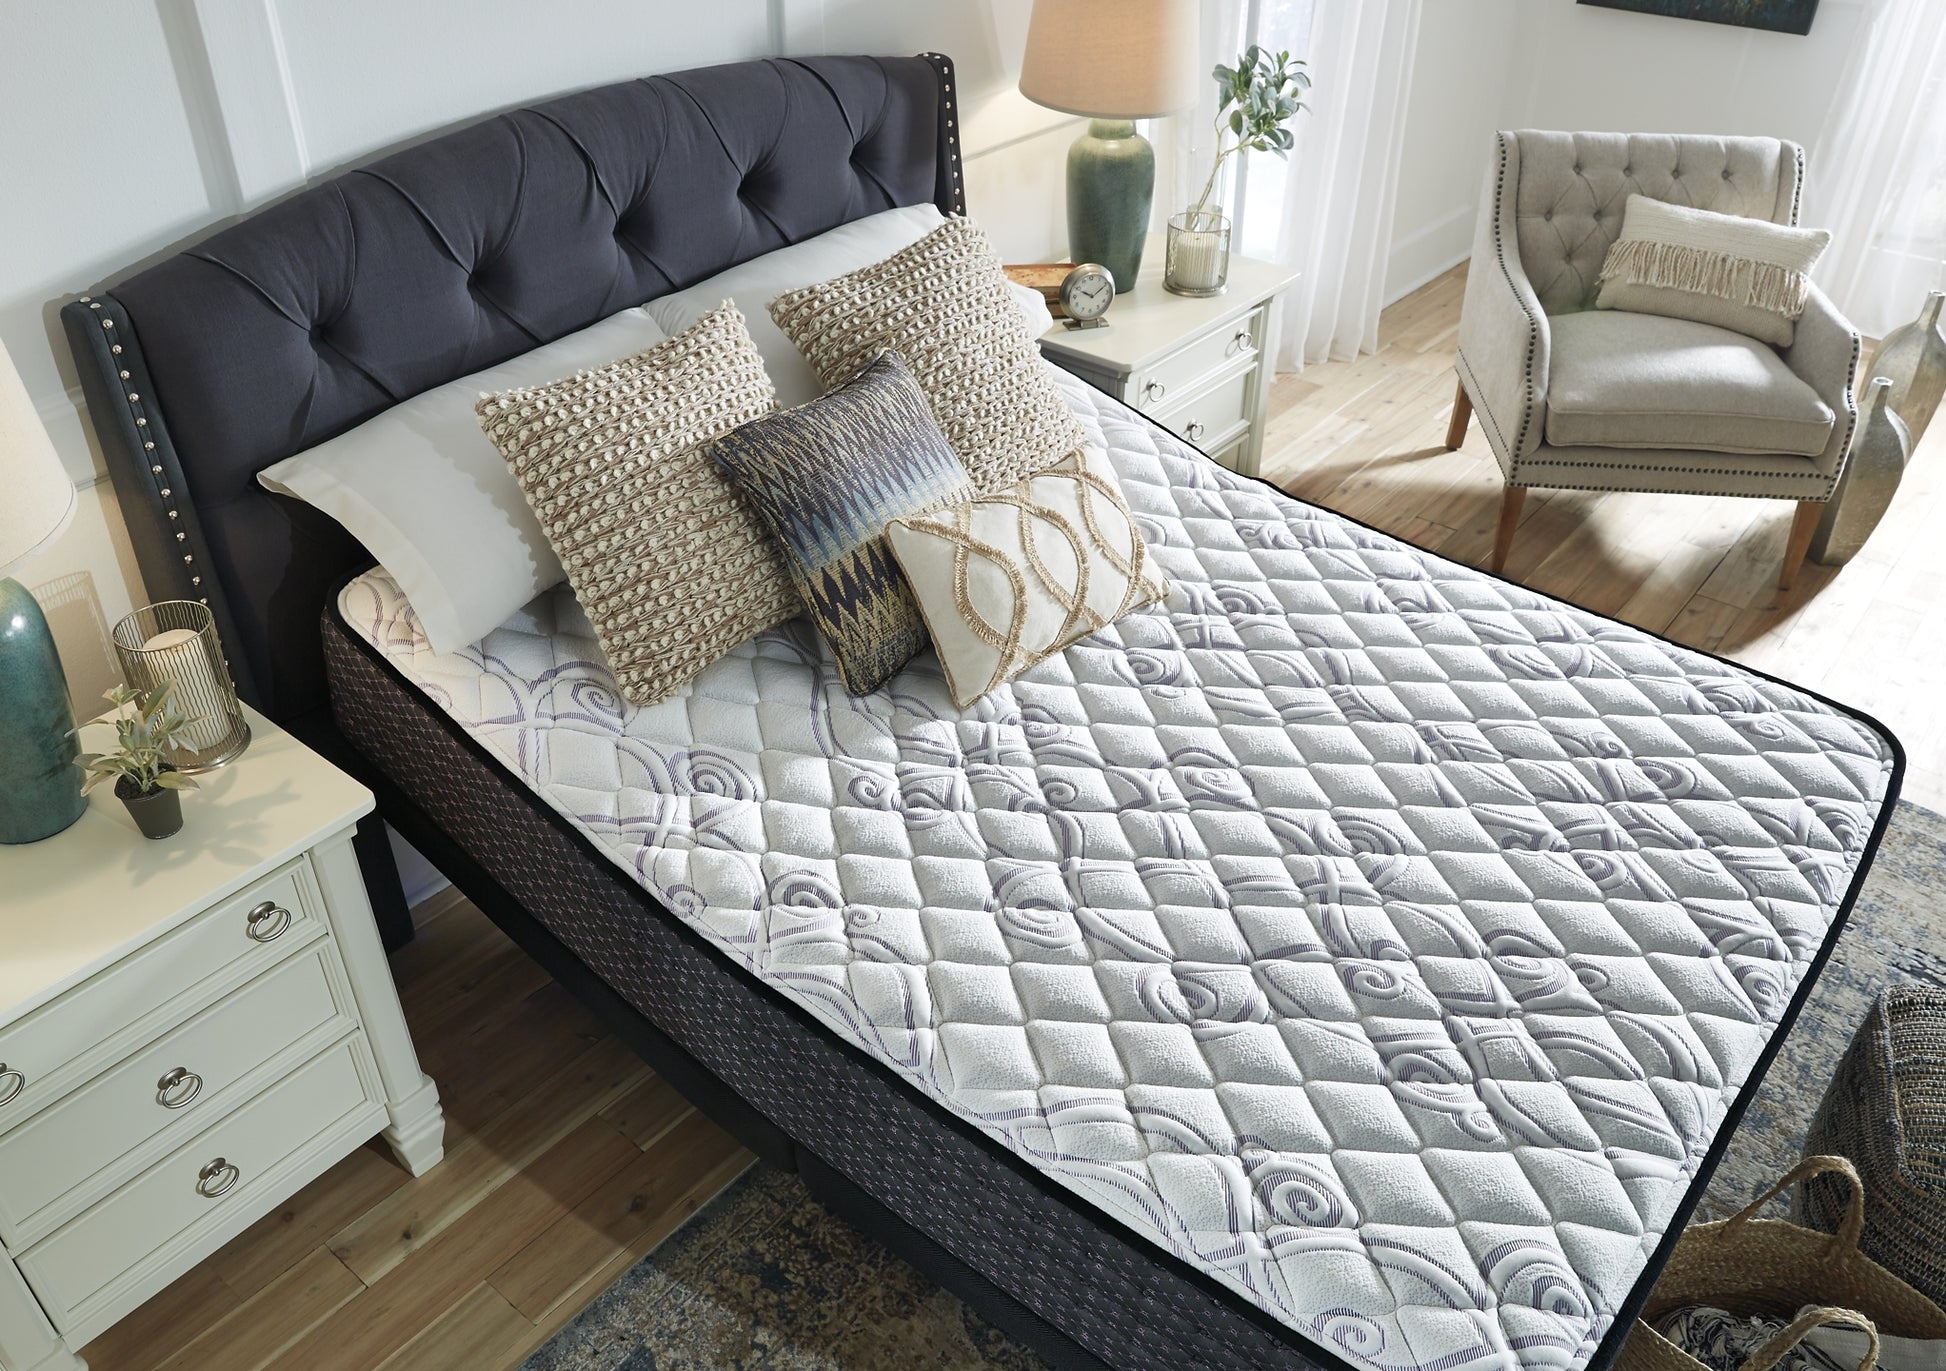 Limited Edition Firm Mattress with Adjustable Base JB's Furniture  Home Furniture, Home Decor, Furniture Store